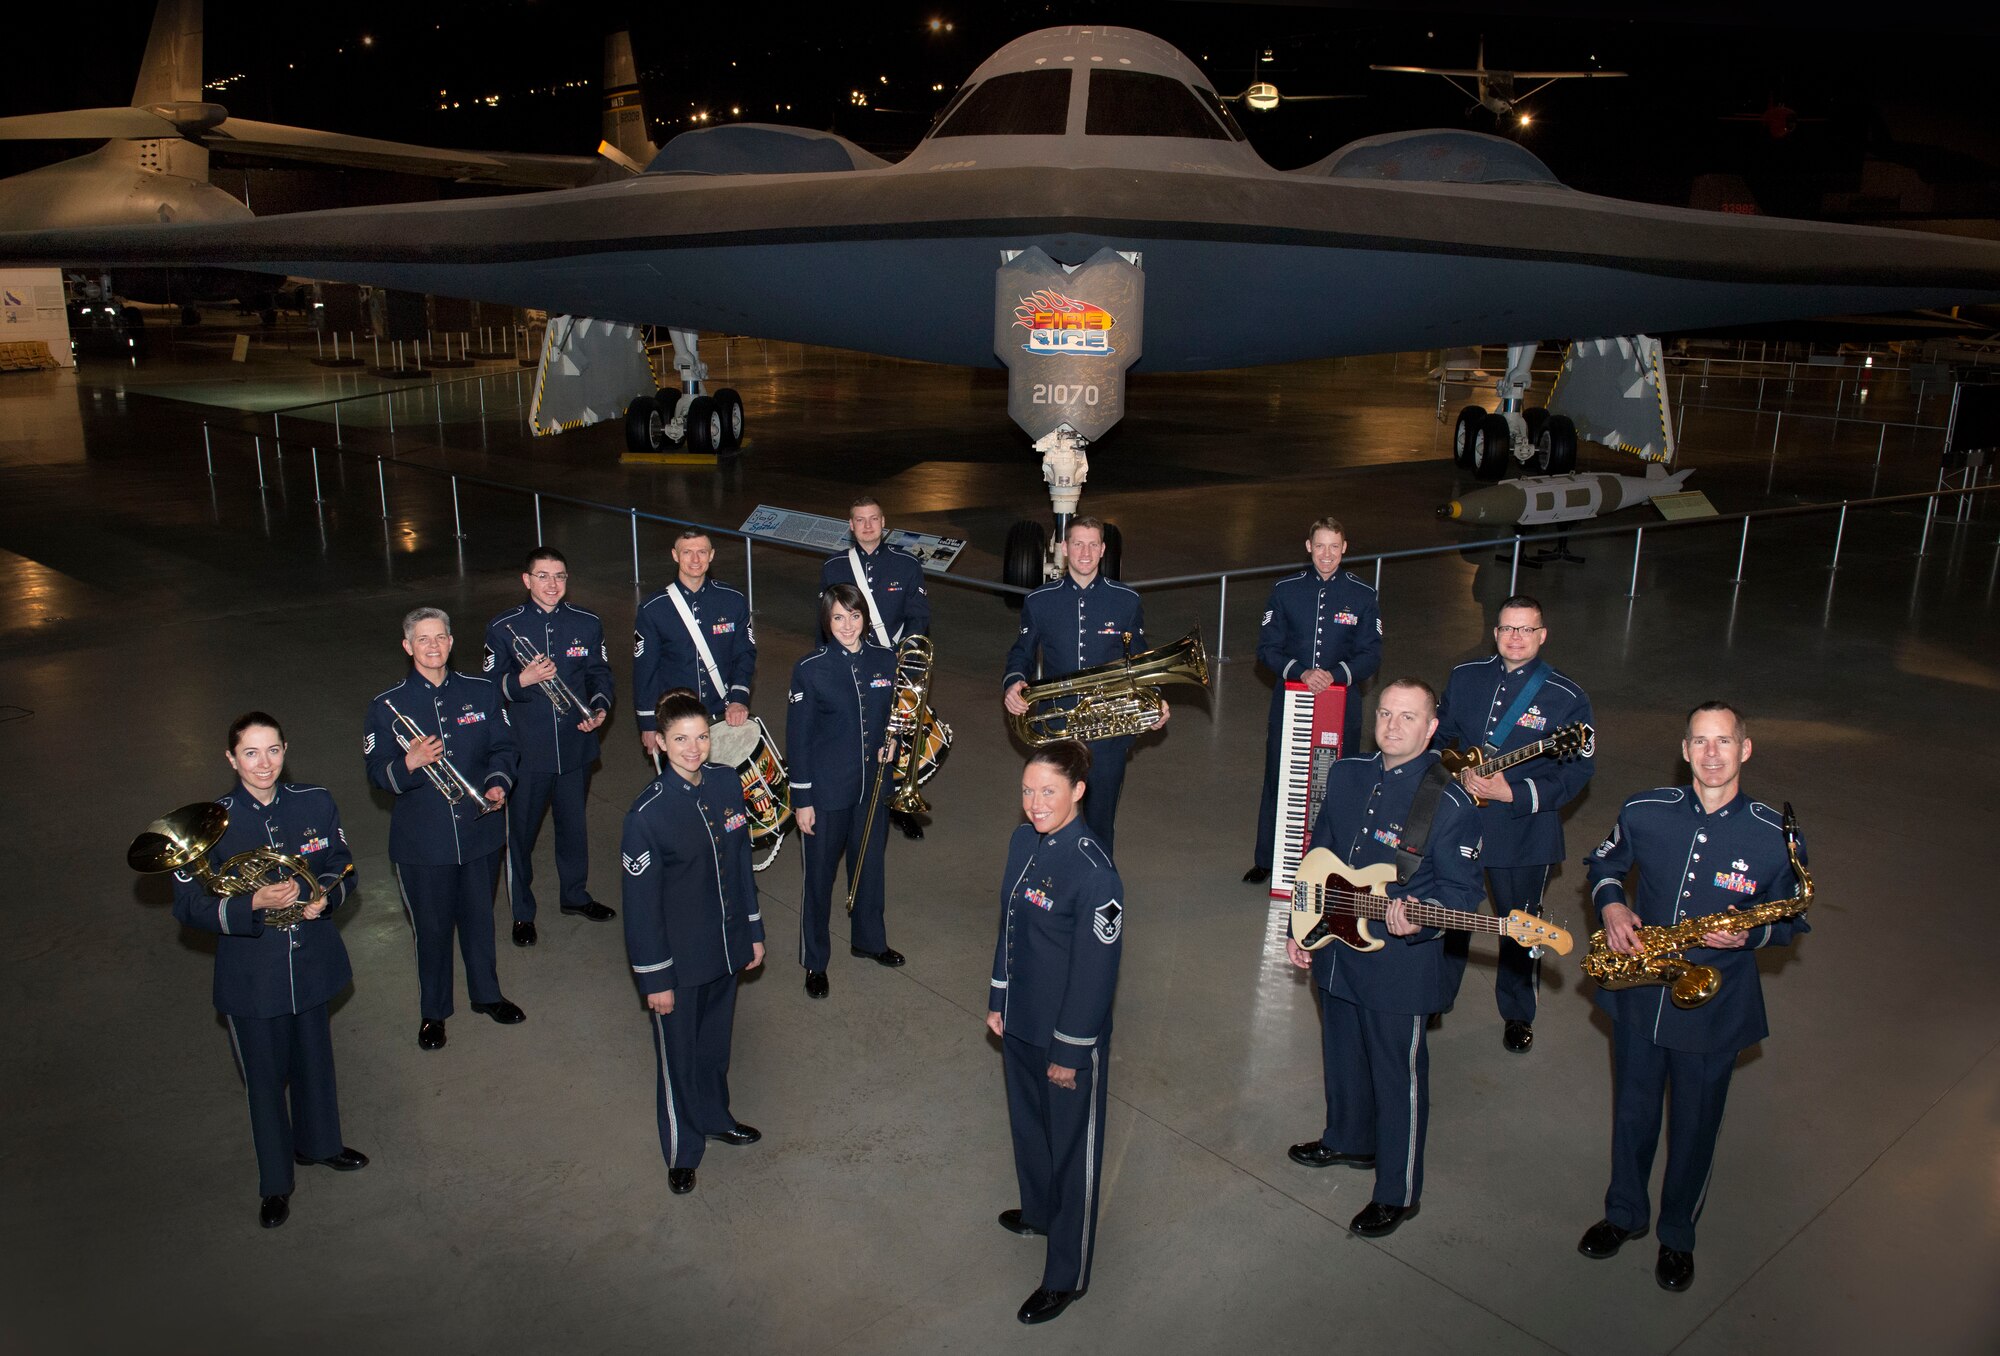 The USAF Band of Flight's new group photo. 